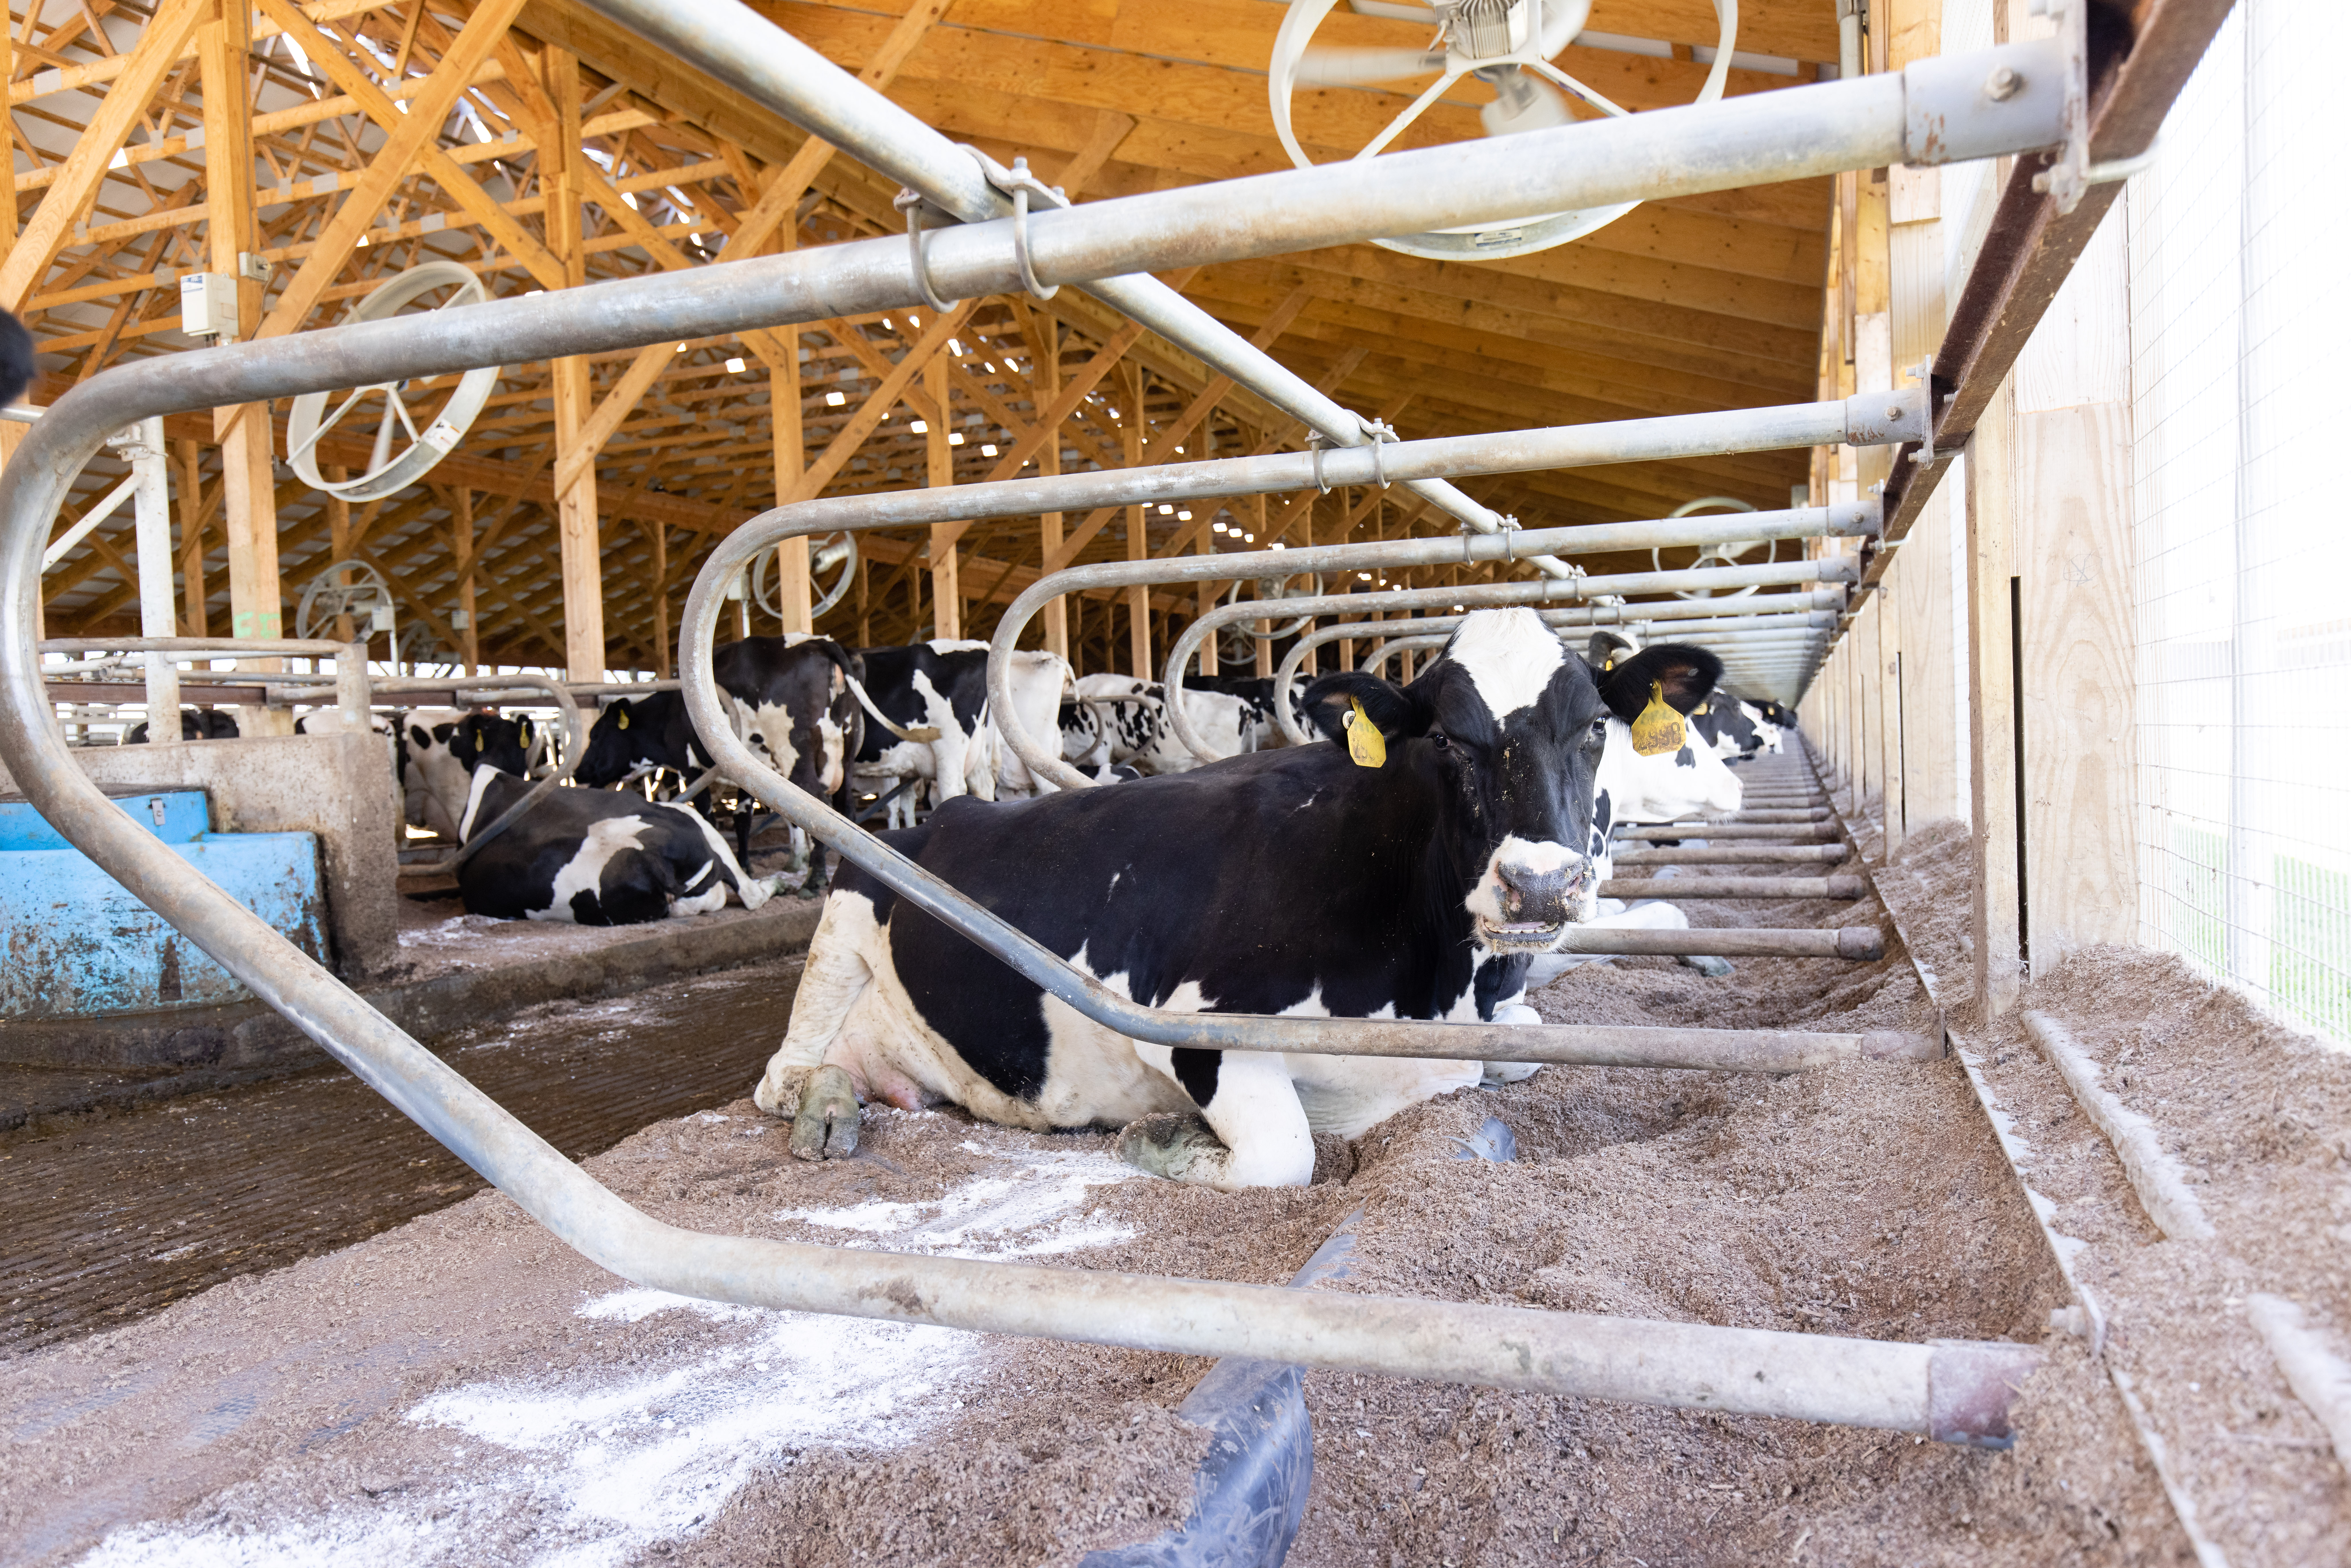 Recycled sand, which stays cool in the summer, is used by some farmers as cow bedding to keep cows cool during heat waves.